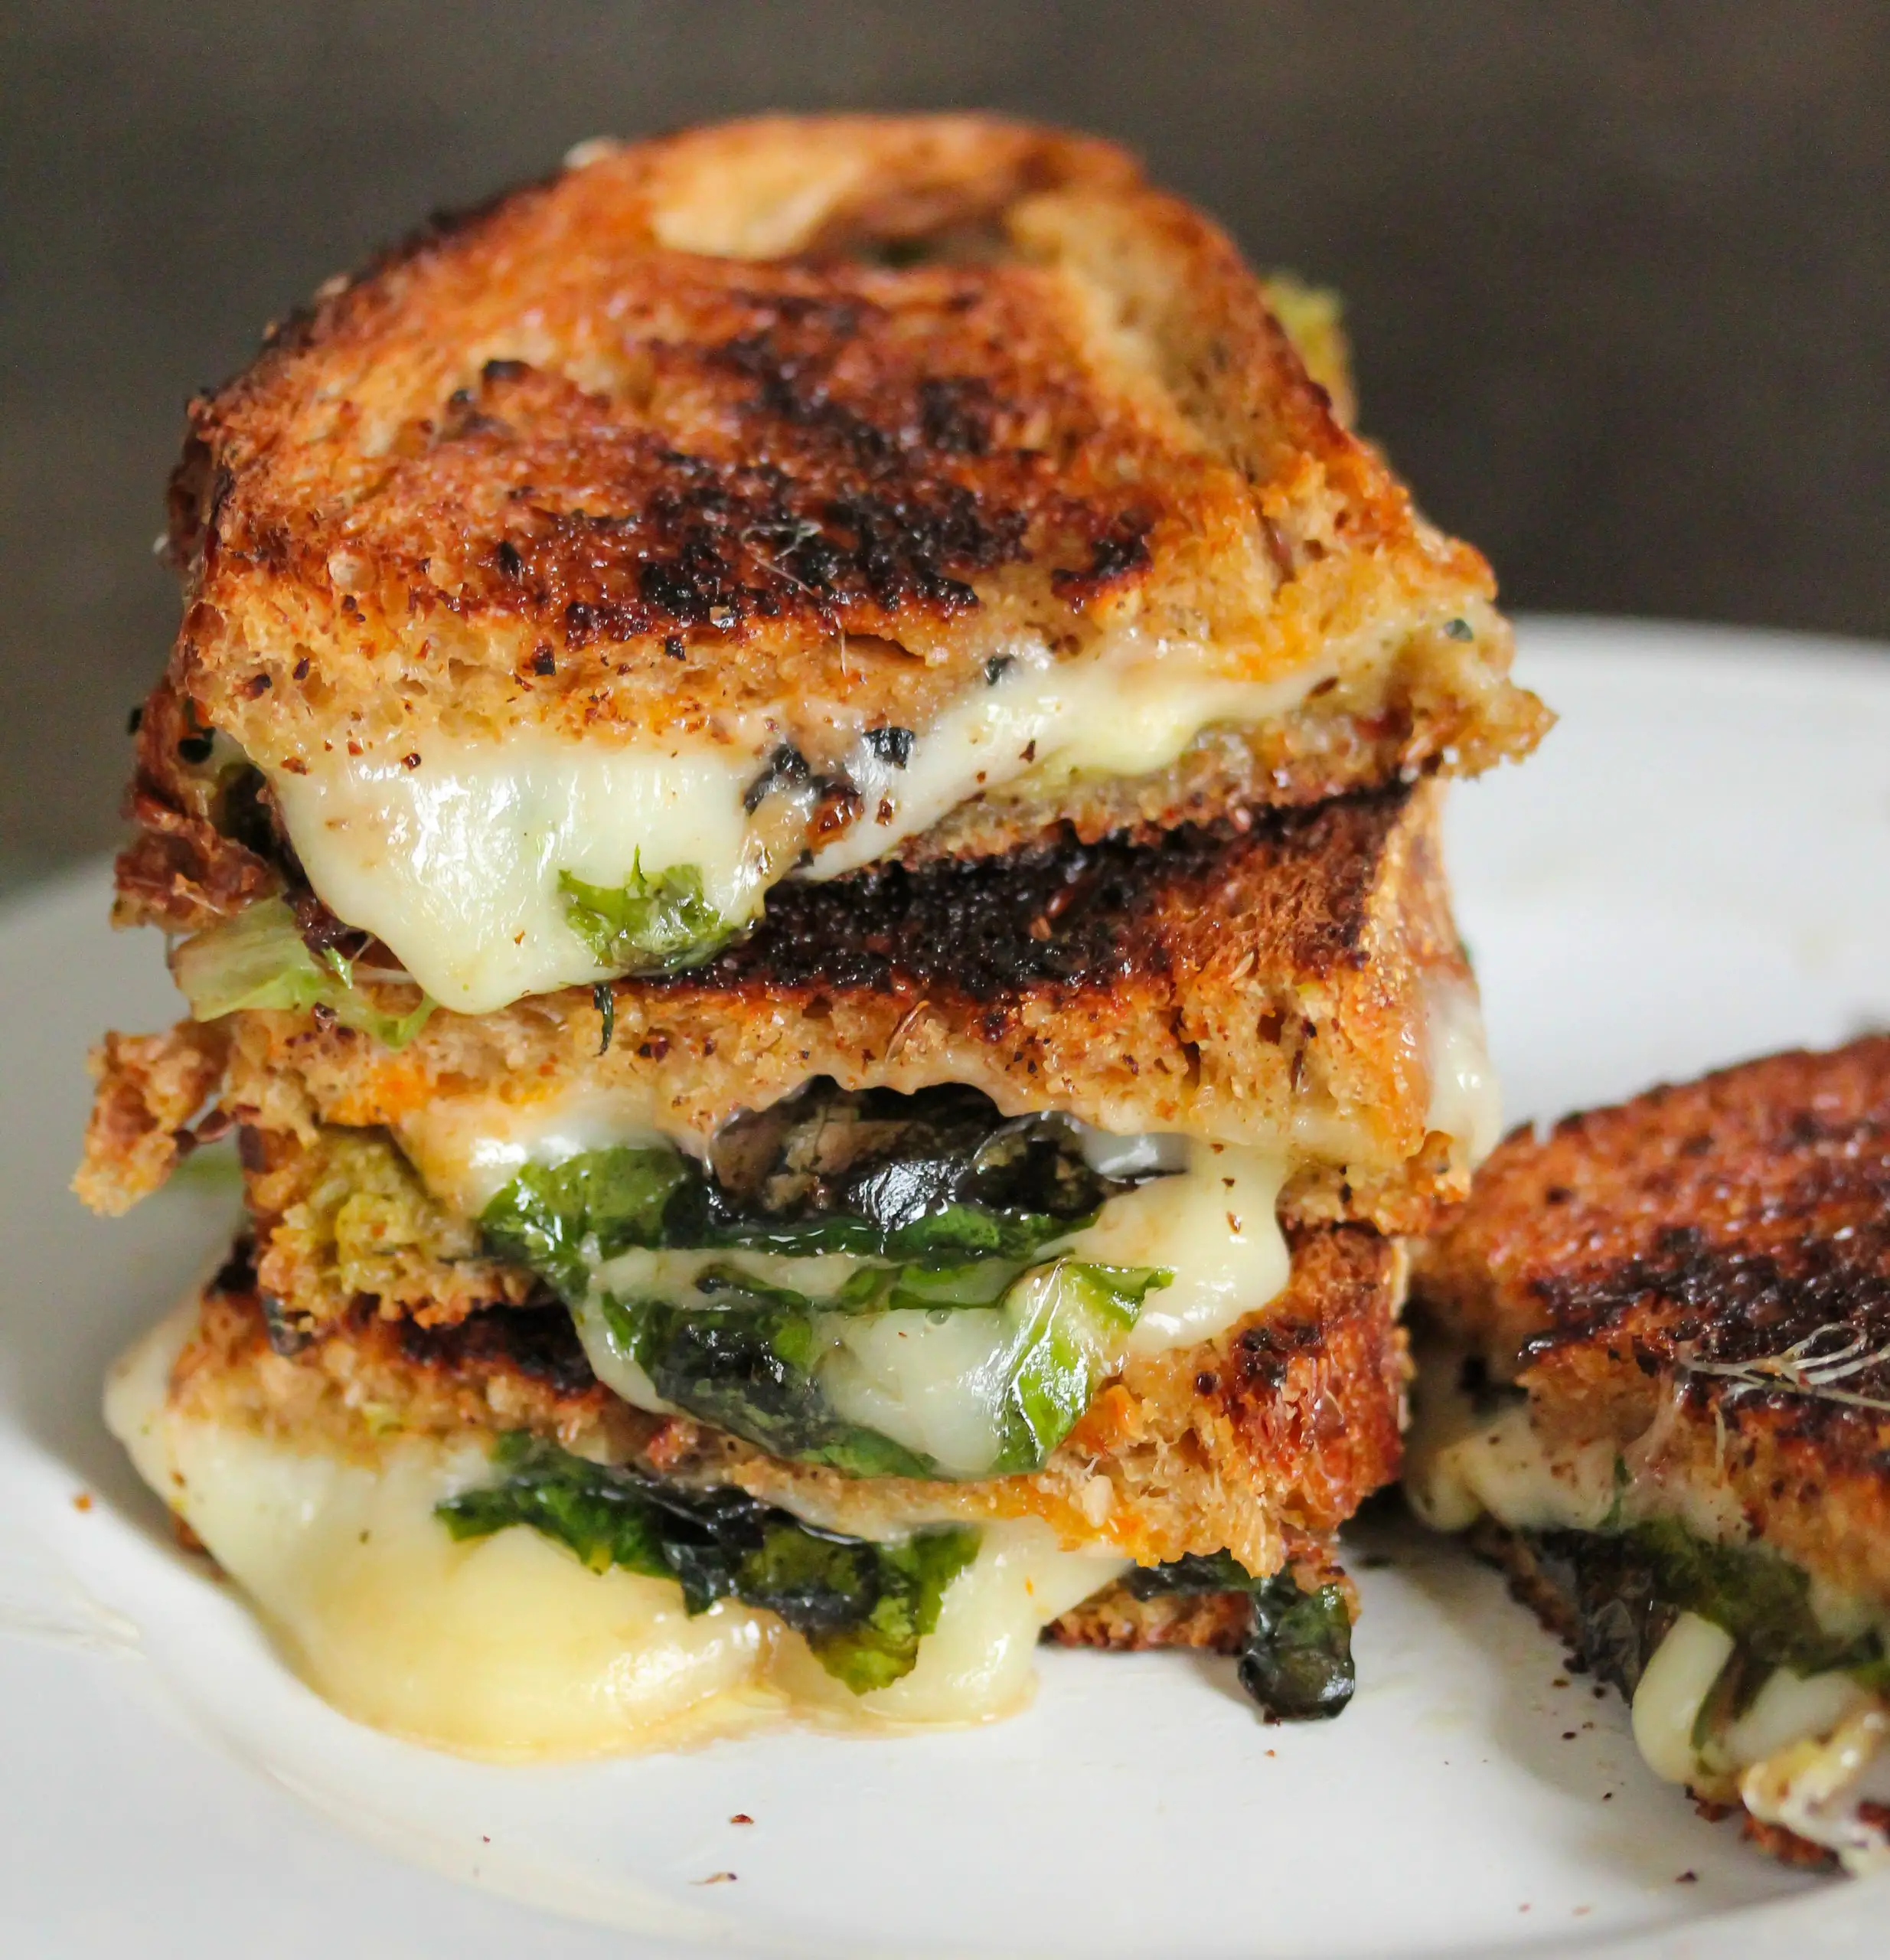 Grilled cheese and spinach sandwich